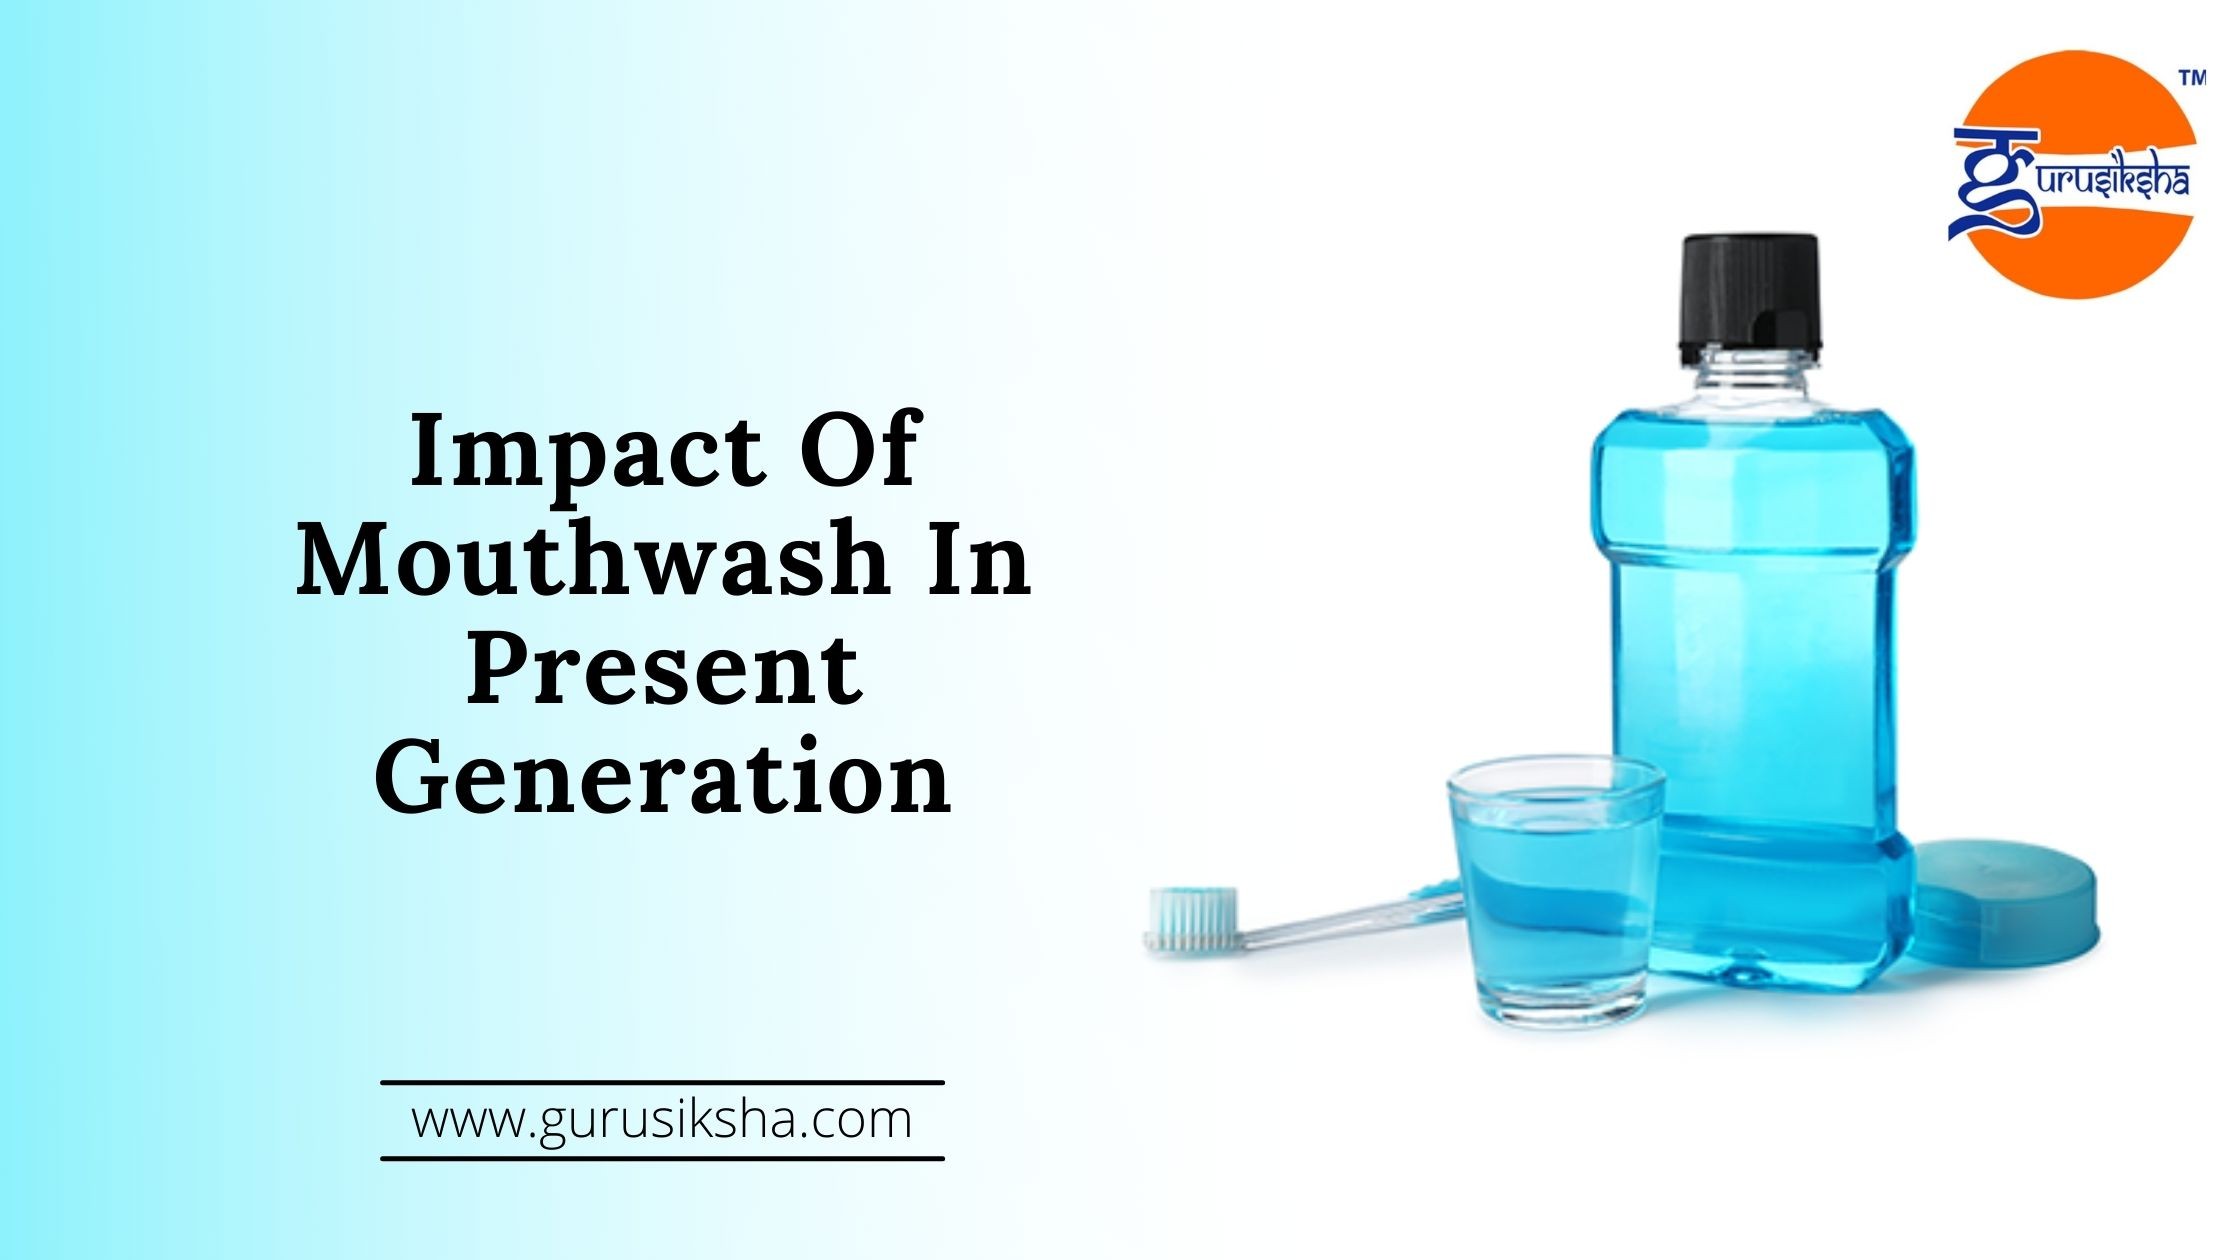 Impact Of Mouthwash In Present Generation